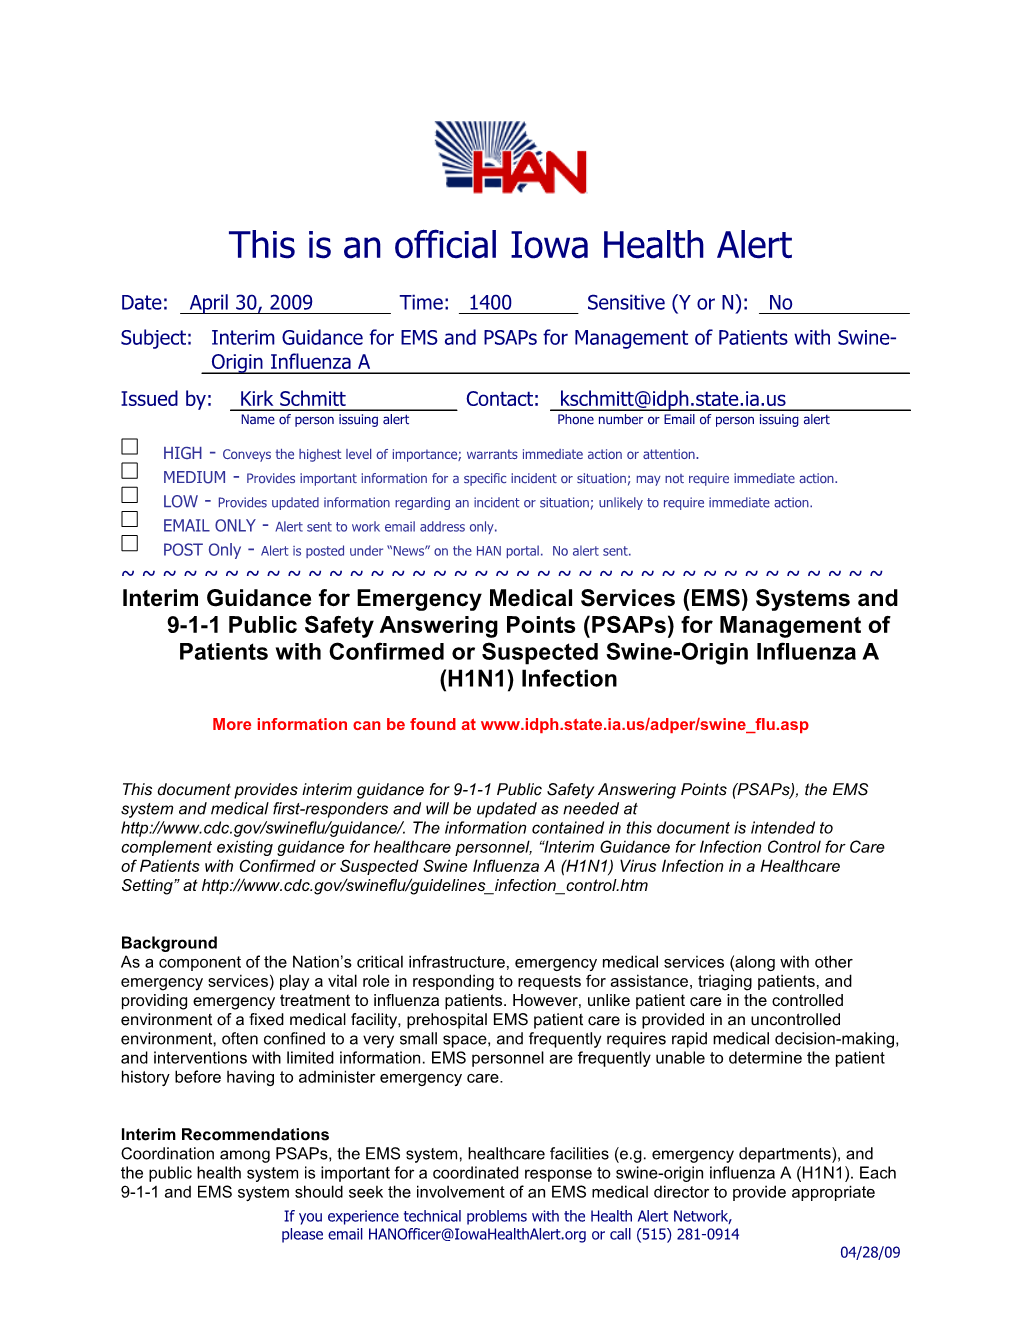 04/30/09 Guidance for EMS and Psaps for Management of Patients with Swine-Origin Influenza A